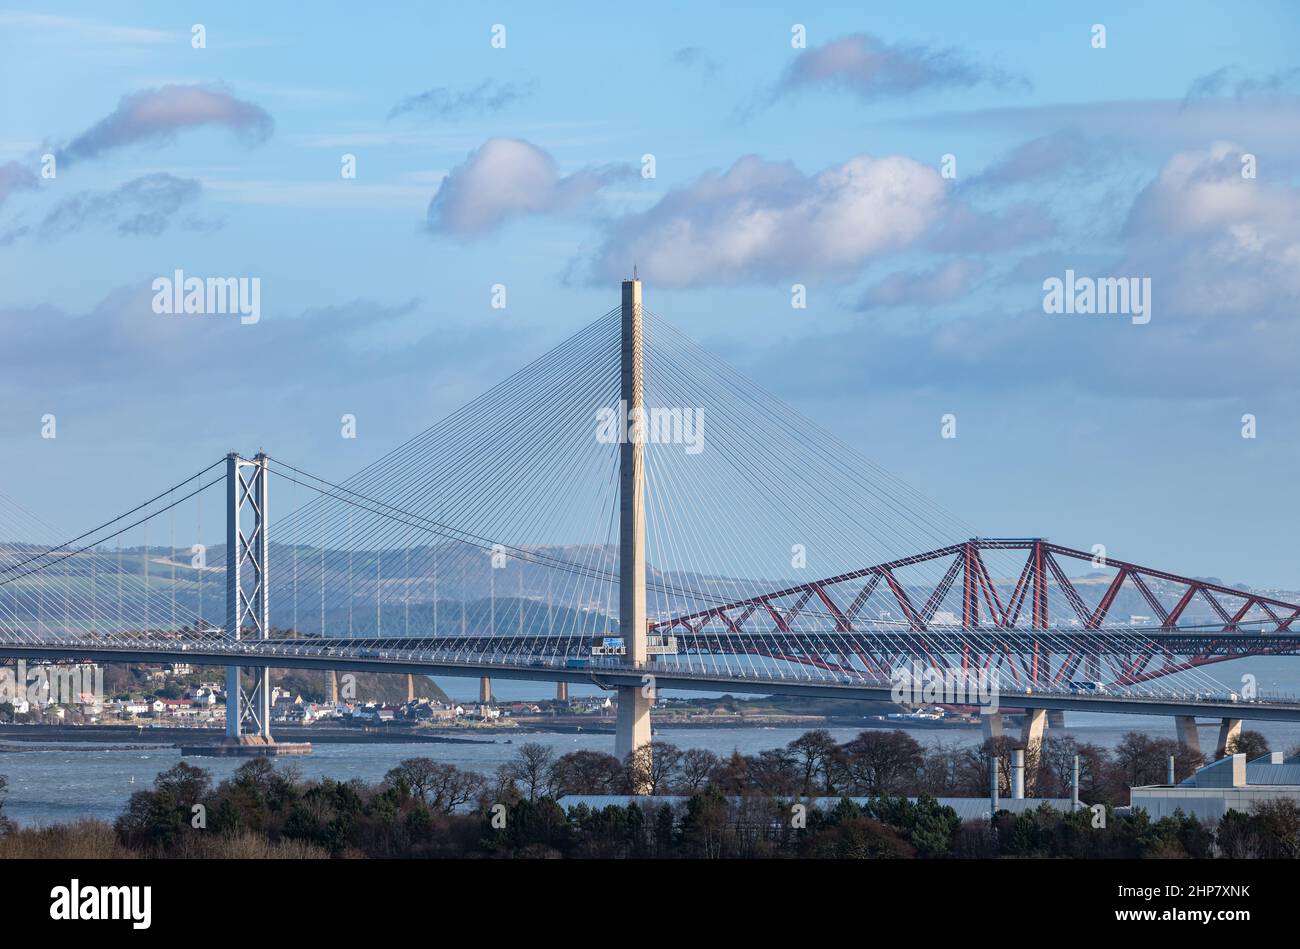 View of three Firth of Forth bridges (Queensferry Crossing, Forth Road & Rail Bridge) in sunshine, Scotland, UK Stock Photo